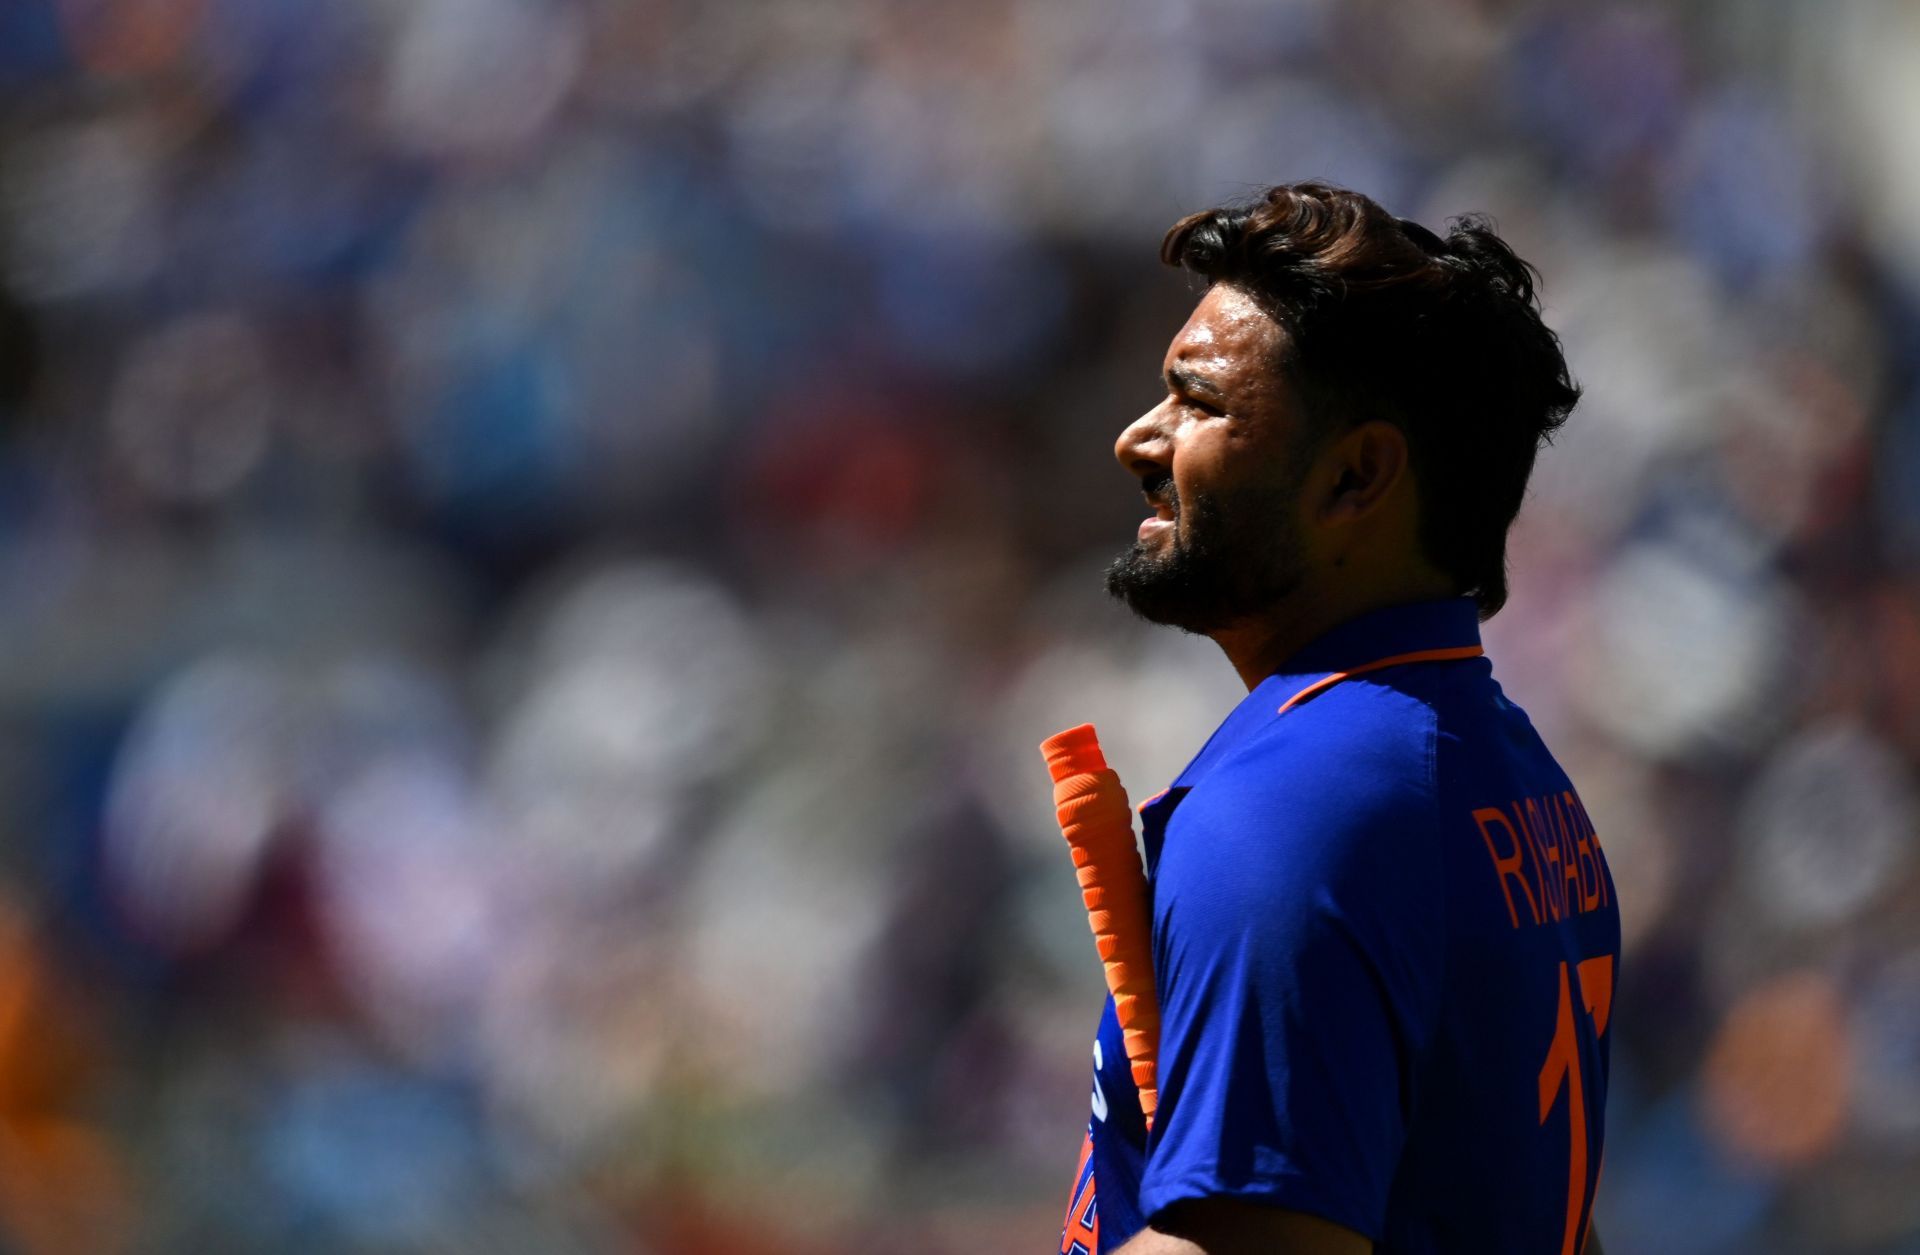 Rishabh Pant showed great promise as a T20 opener for India in the second T20I against England. (P.C.:Getty)